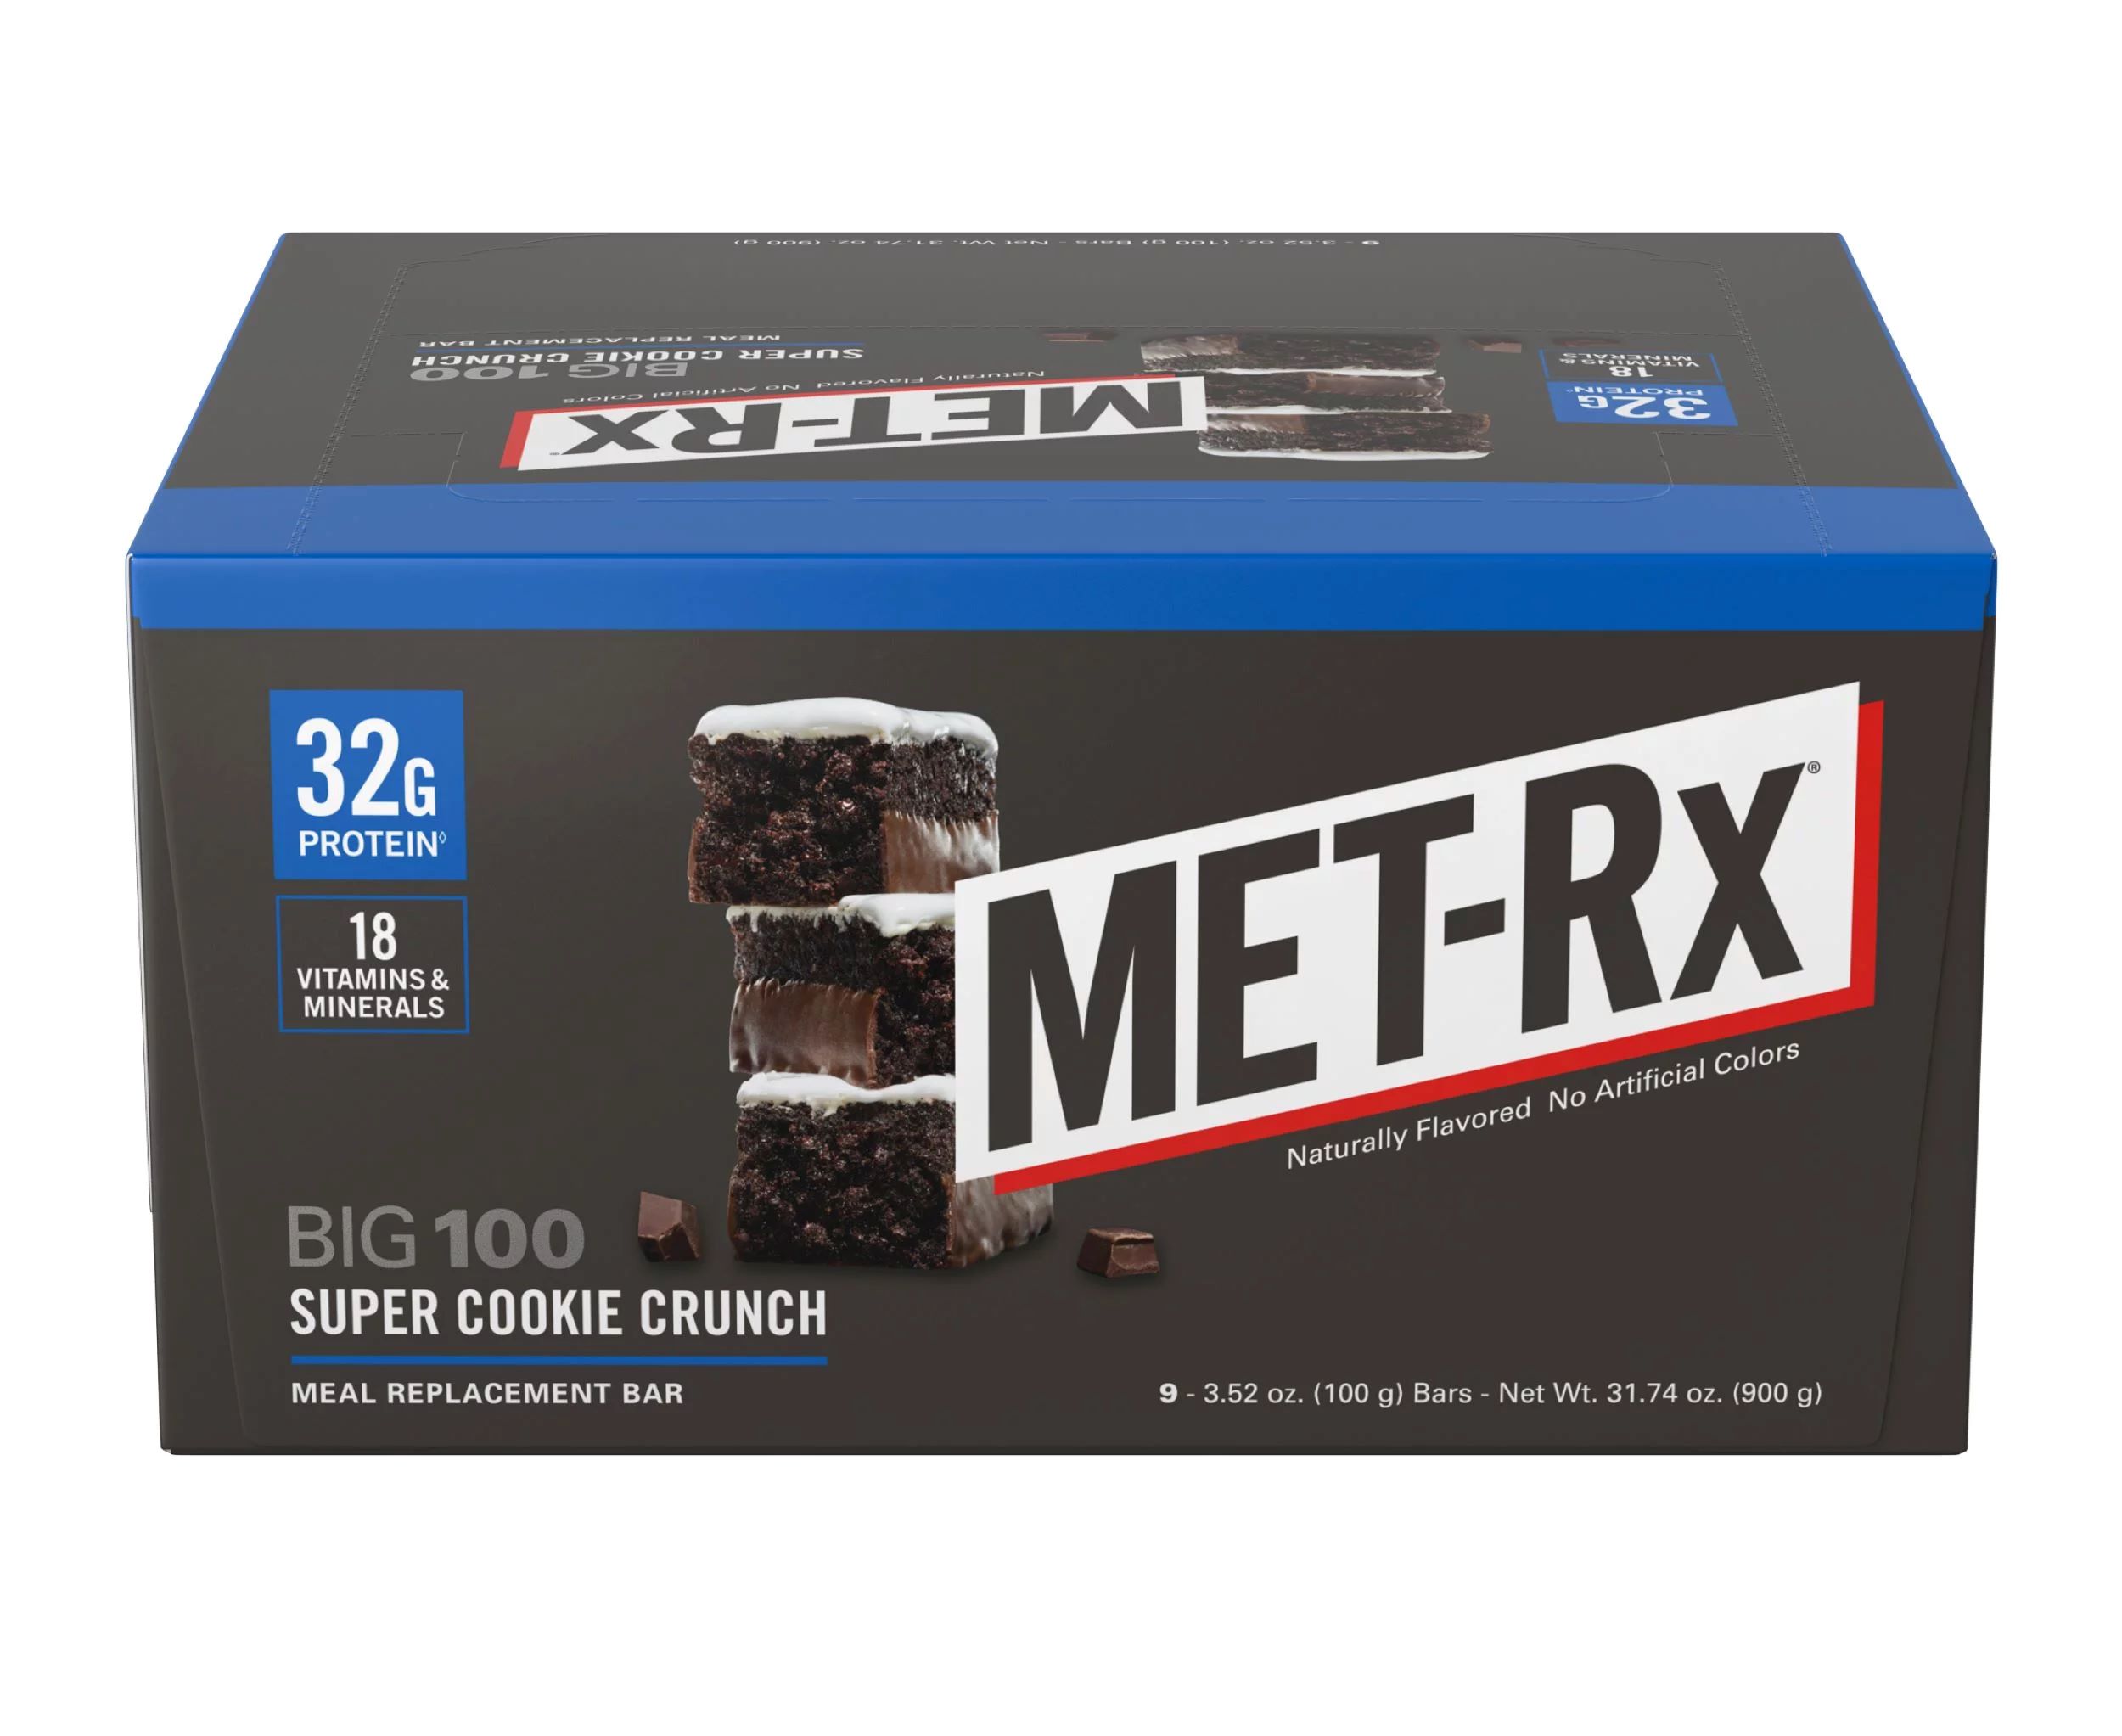 18-met-rx-bars-nutrition-facts